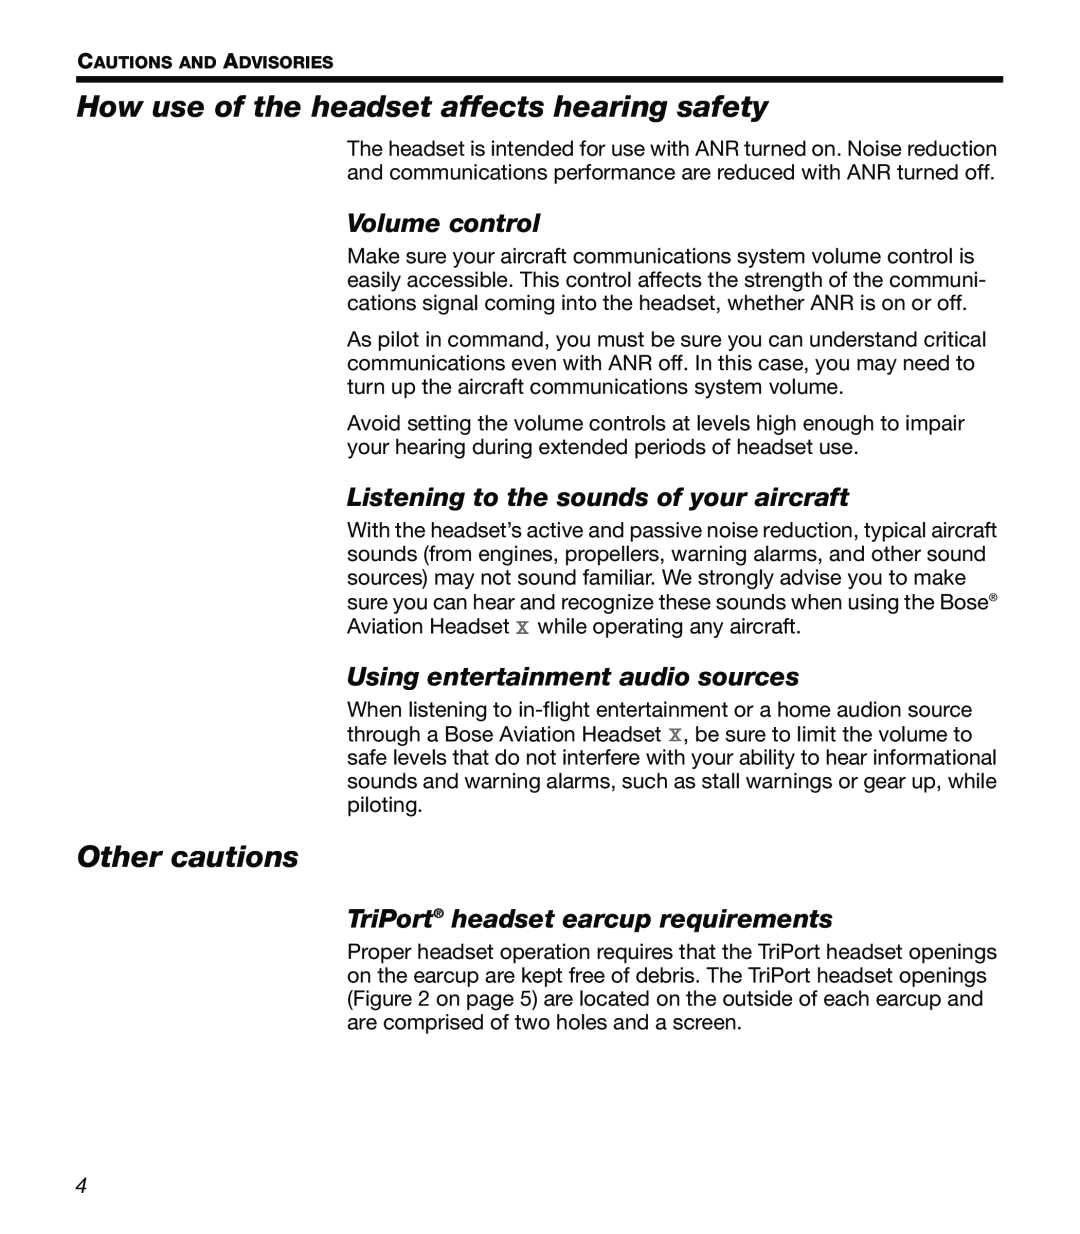 Bose X How use of the headset affects hearing safety, Other cautions, Volume control, Using entertainment audio sources 